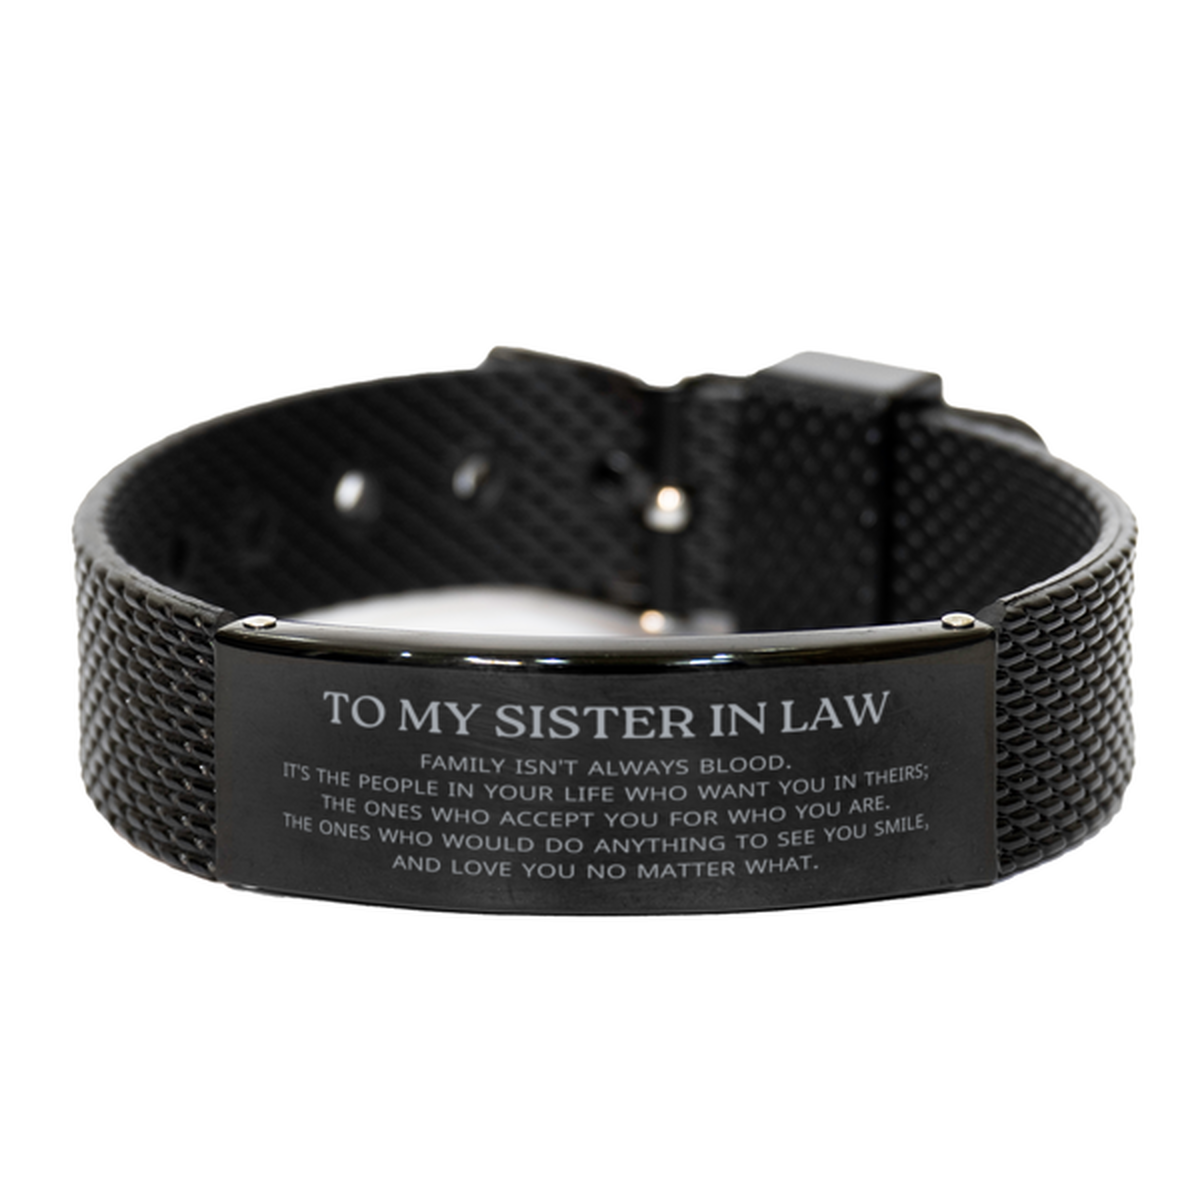 To My Sister In Law Gifts, Family isn't always blood, Sister In Law Black Shark Mesh Bracelet, Birthday Christmas Unique Present For Sister In Law